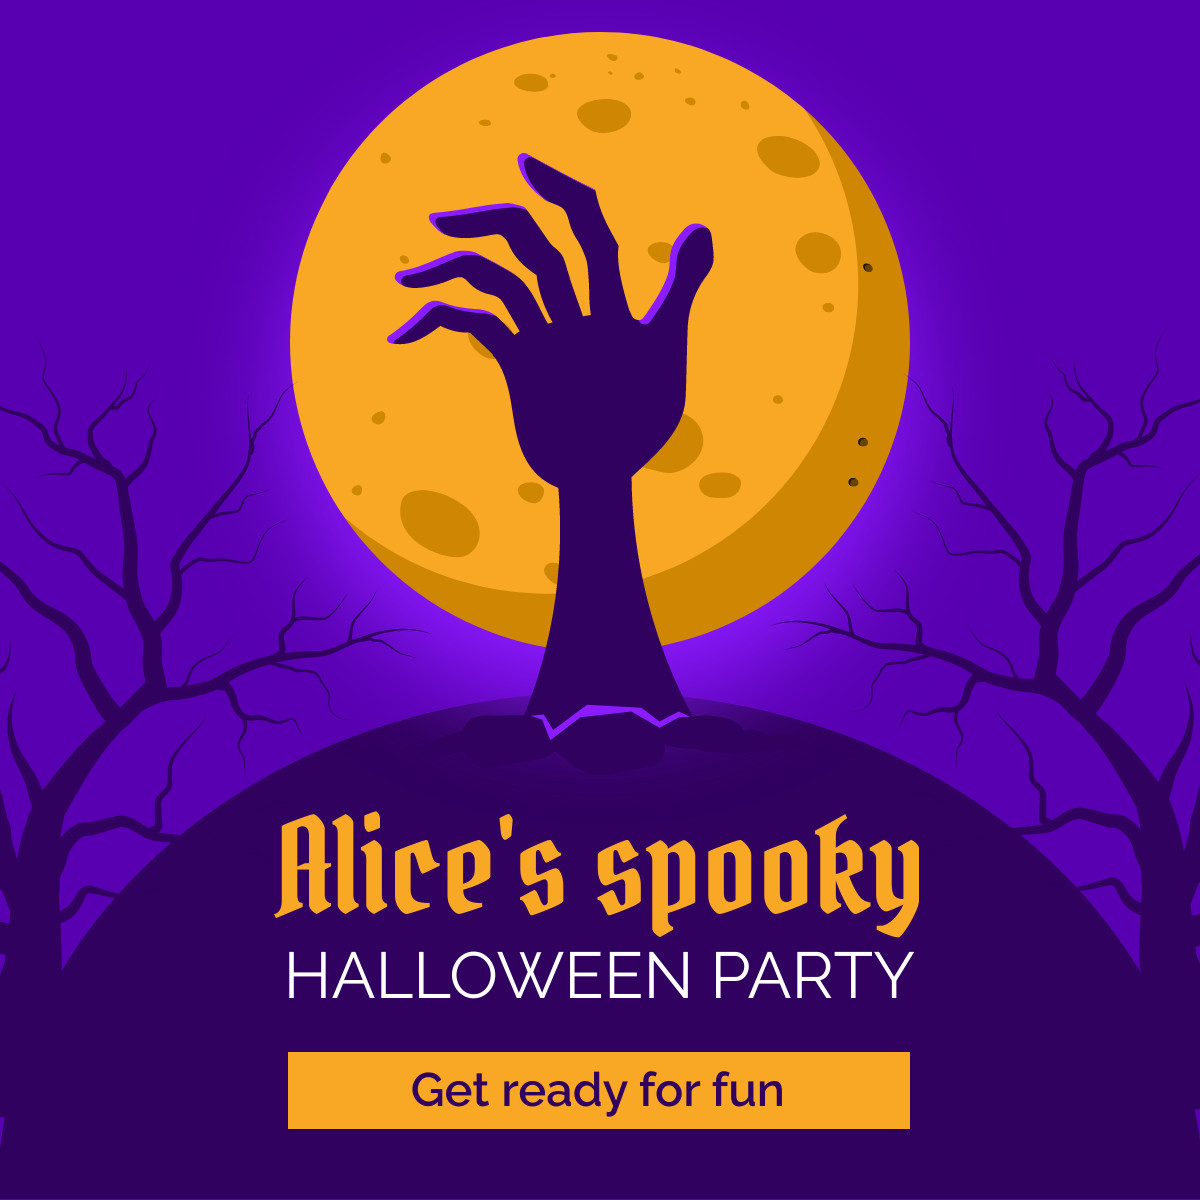 Halloween Party Ad Template Responsive Square Art 1200x1200